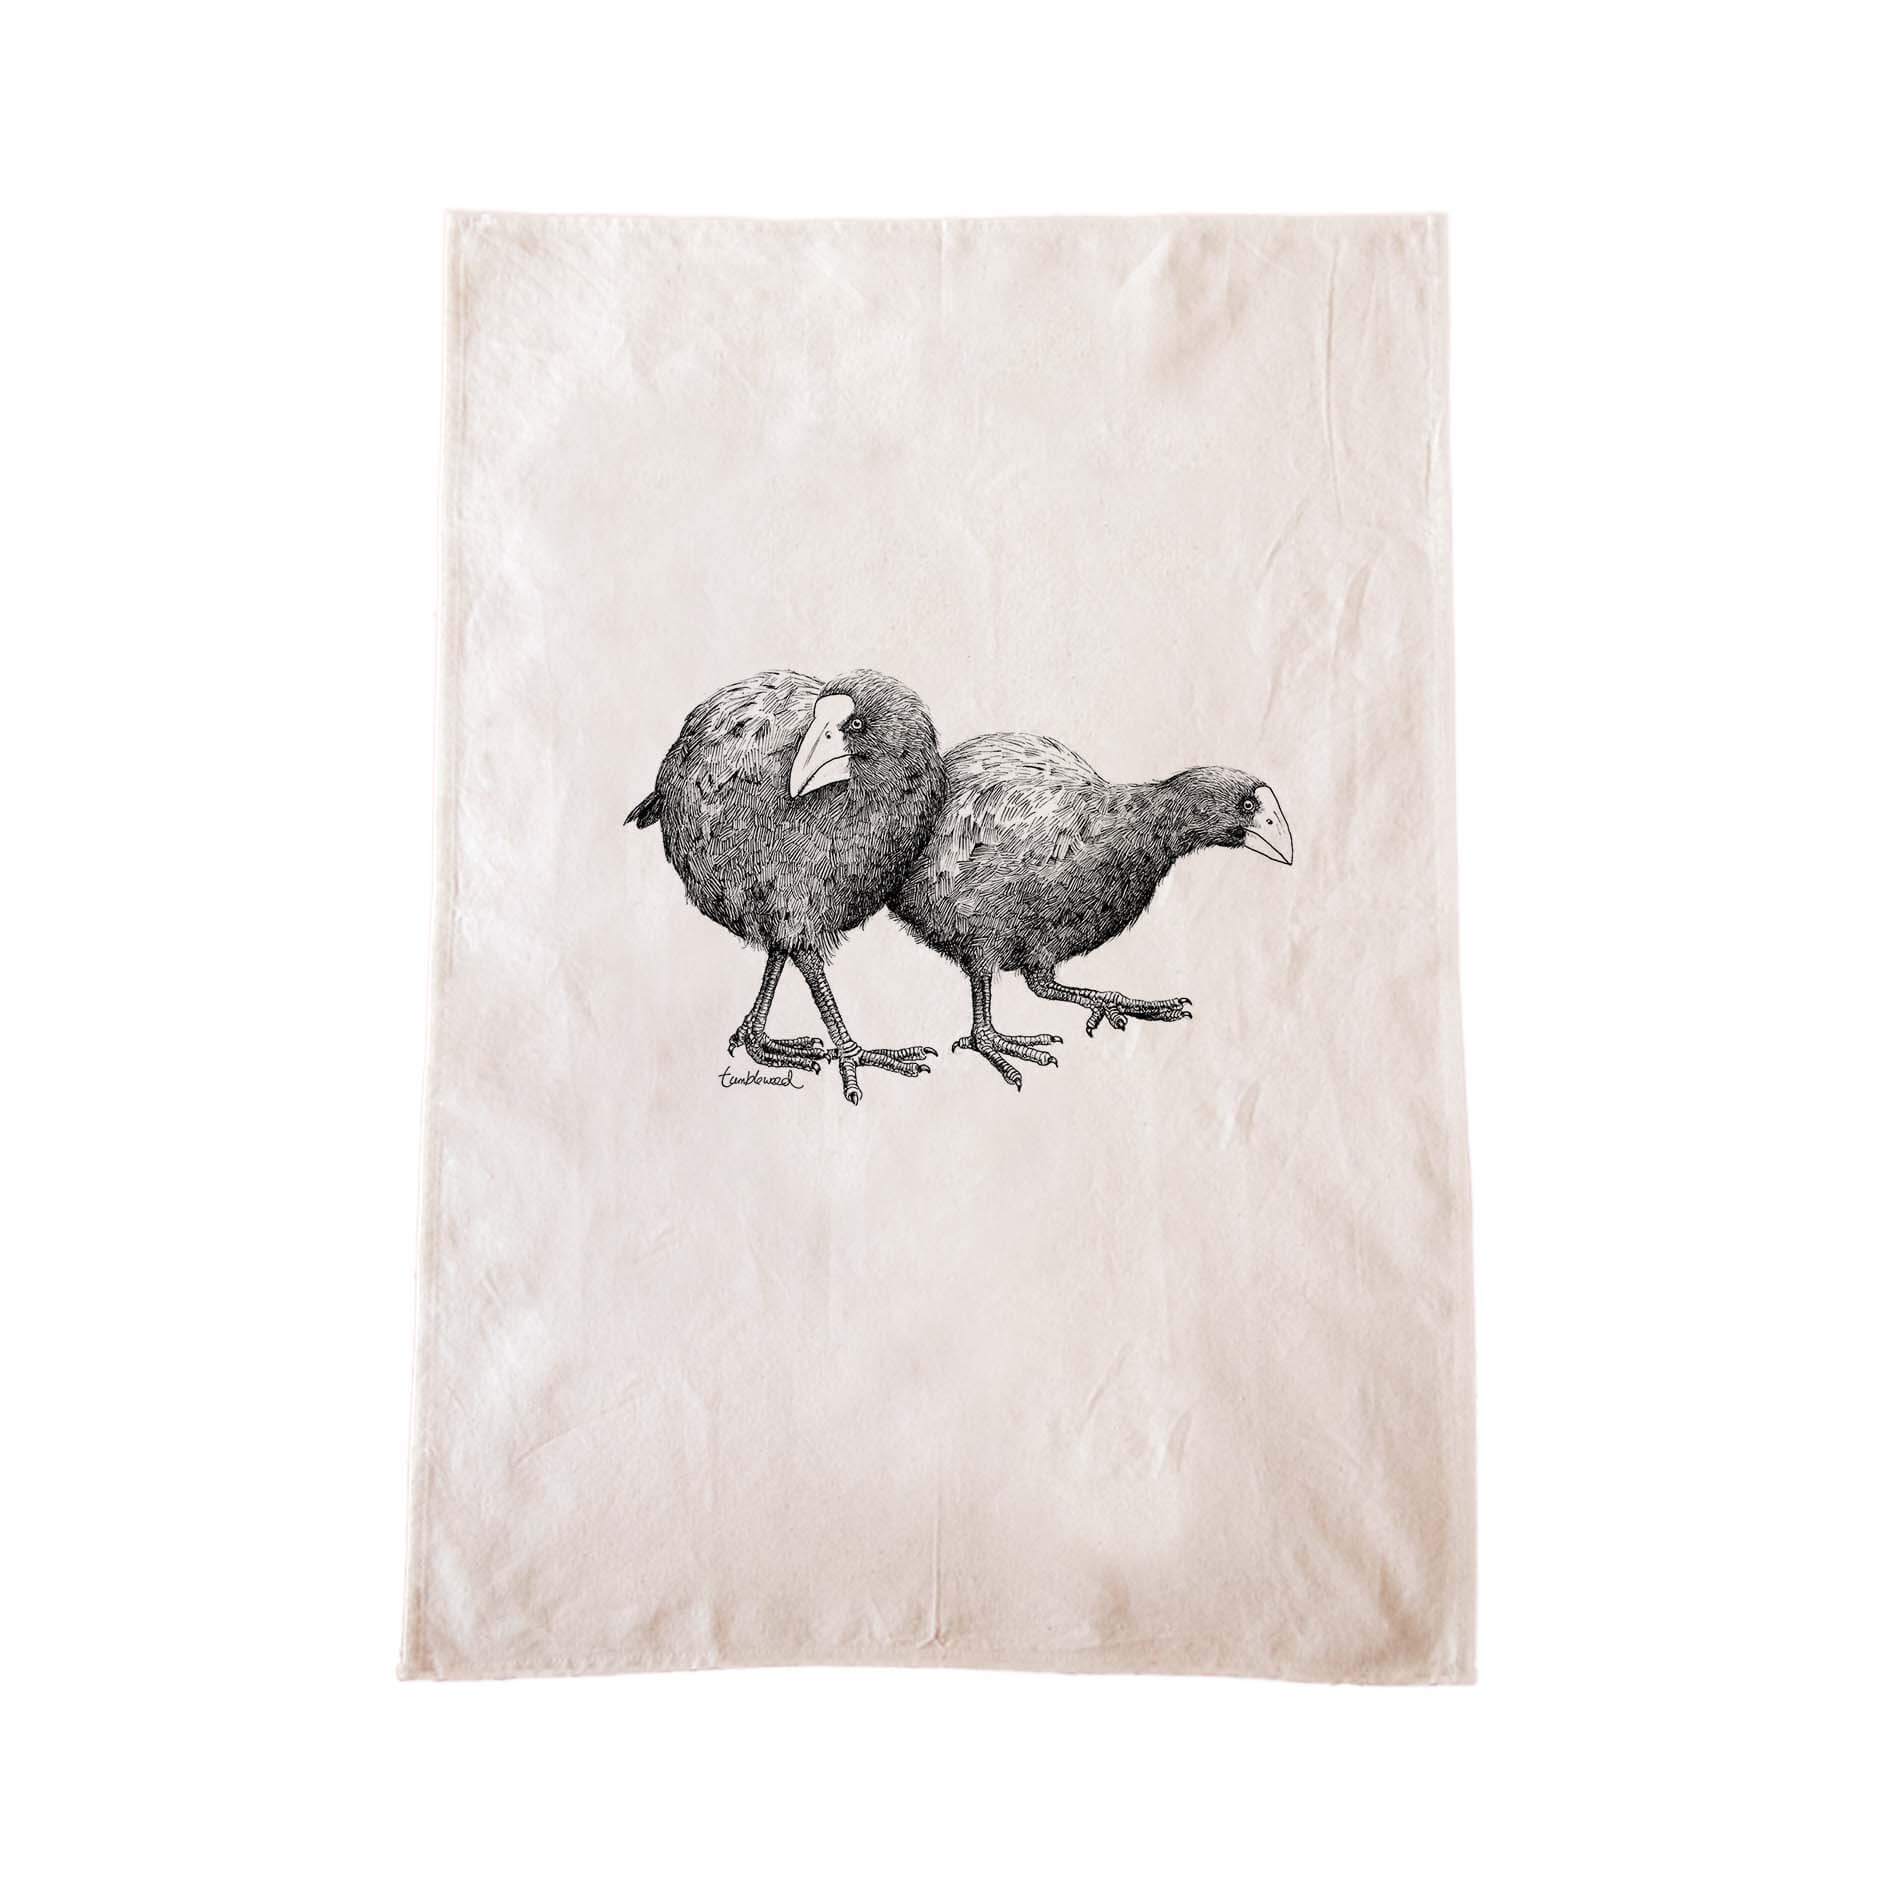 Off-white cotton tea towel with a screen printed Takahē design.